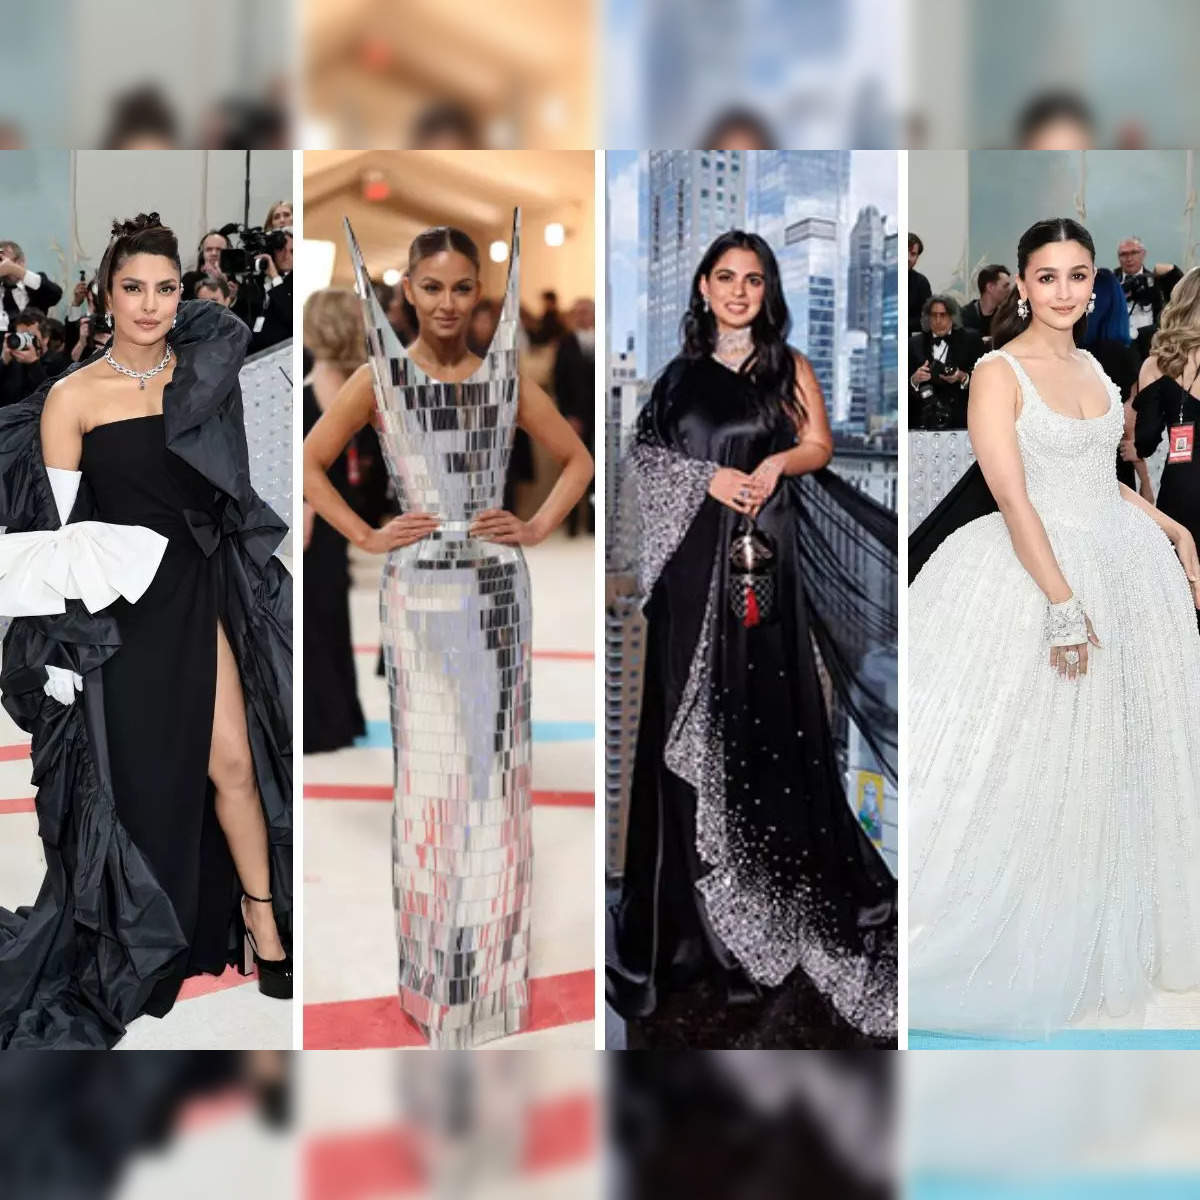 Pearls, Chanel brides, and sustainability ruled the Met Gala 2023 carpet